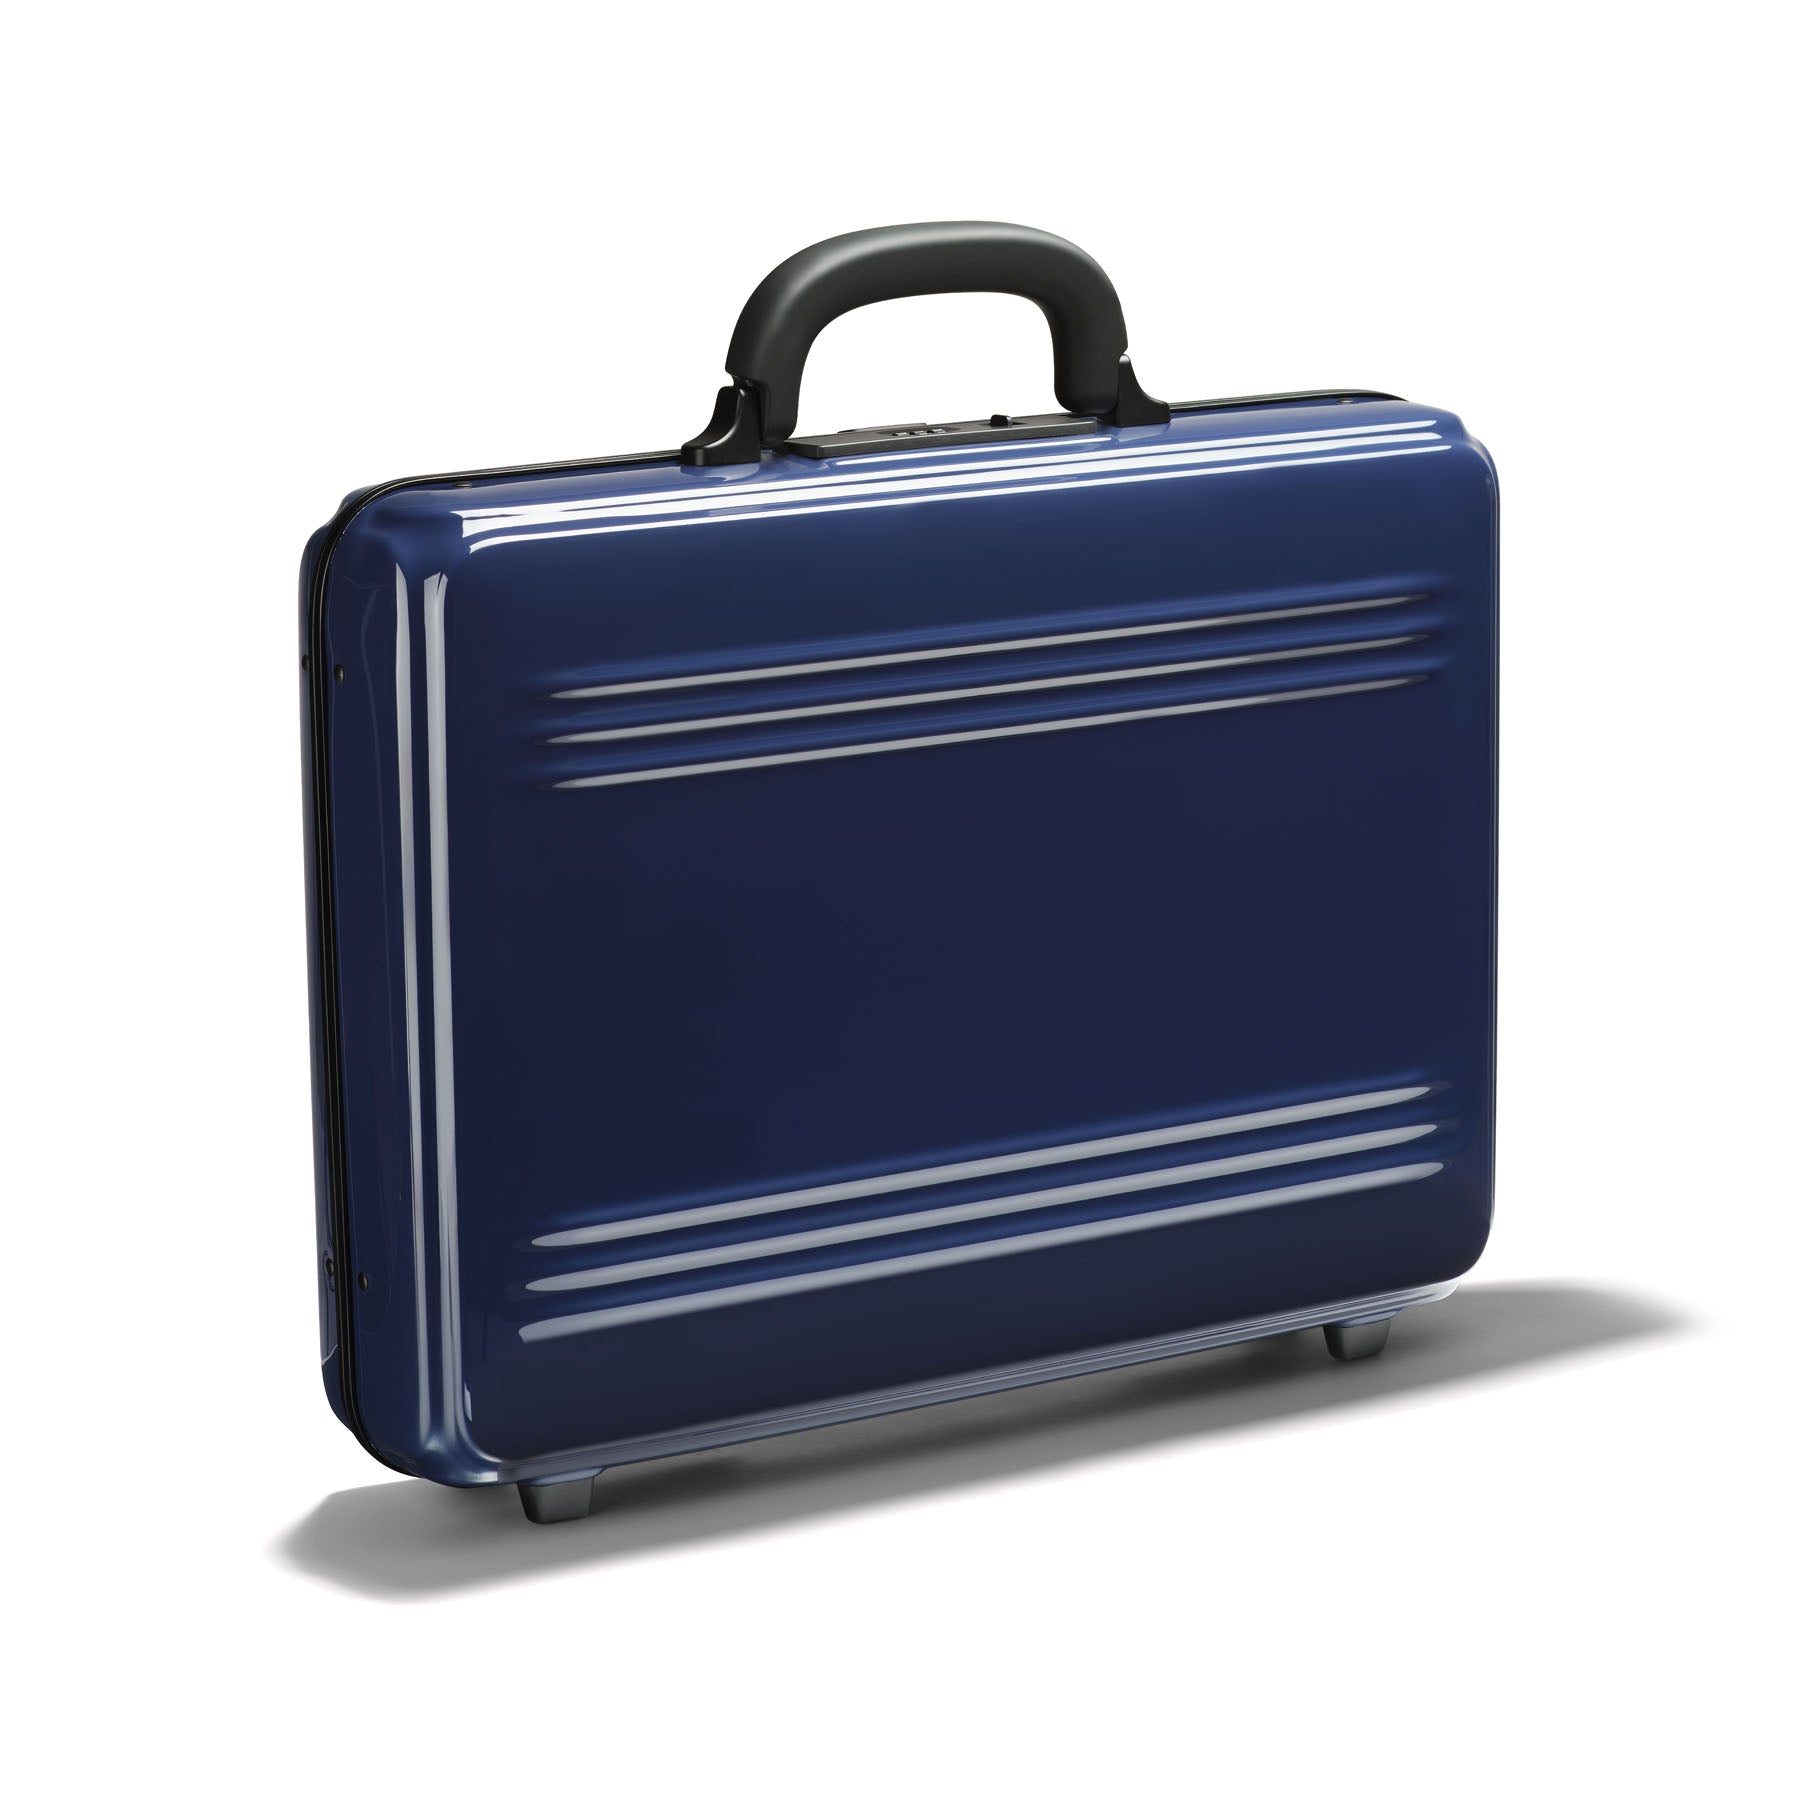 Polycarbonate Luggage - Lightweight, Hardsided Checked and Carry 